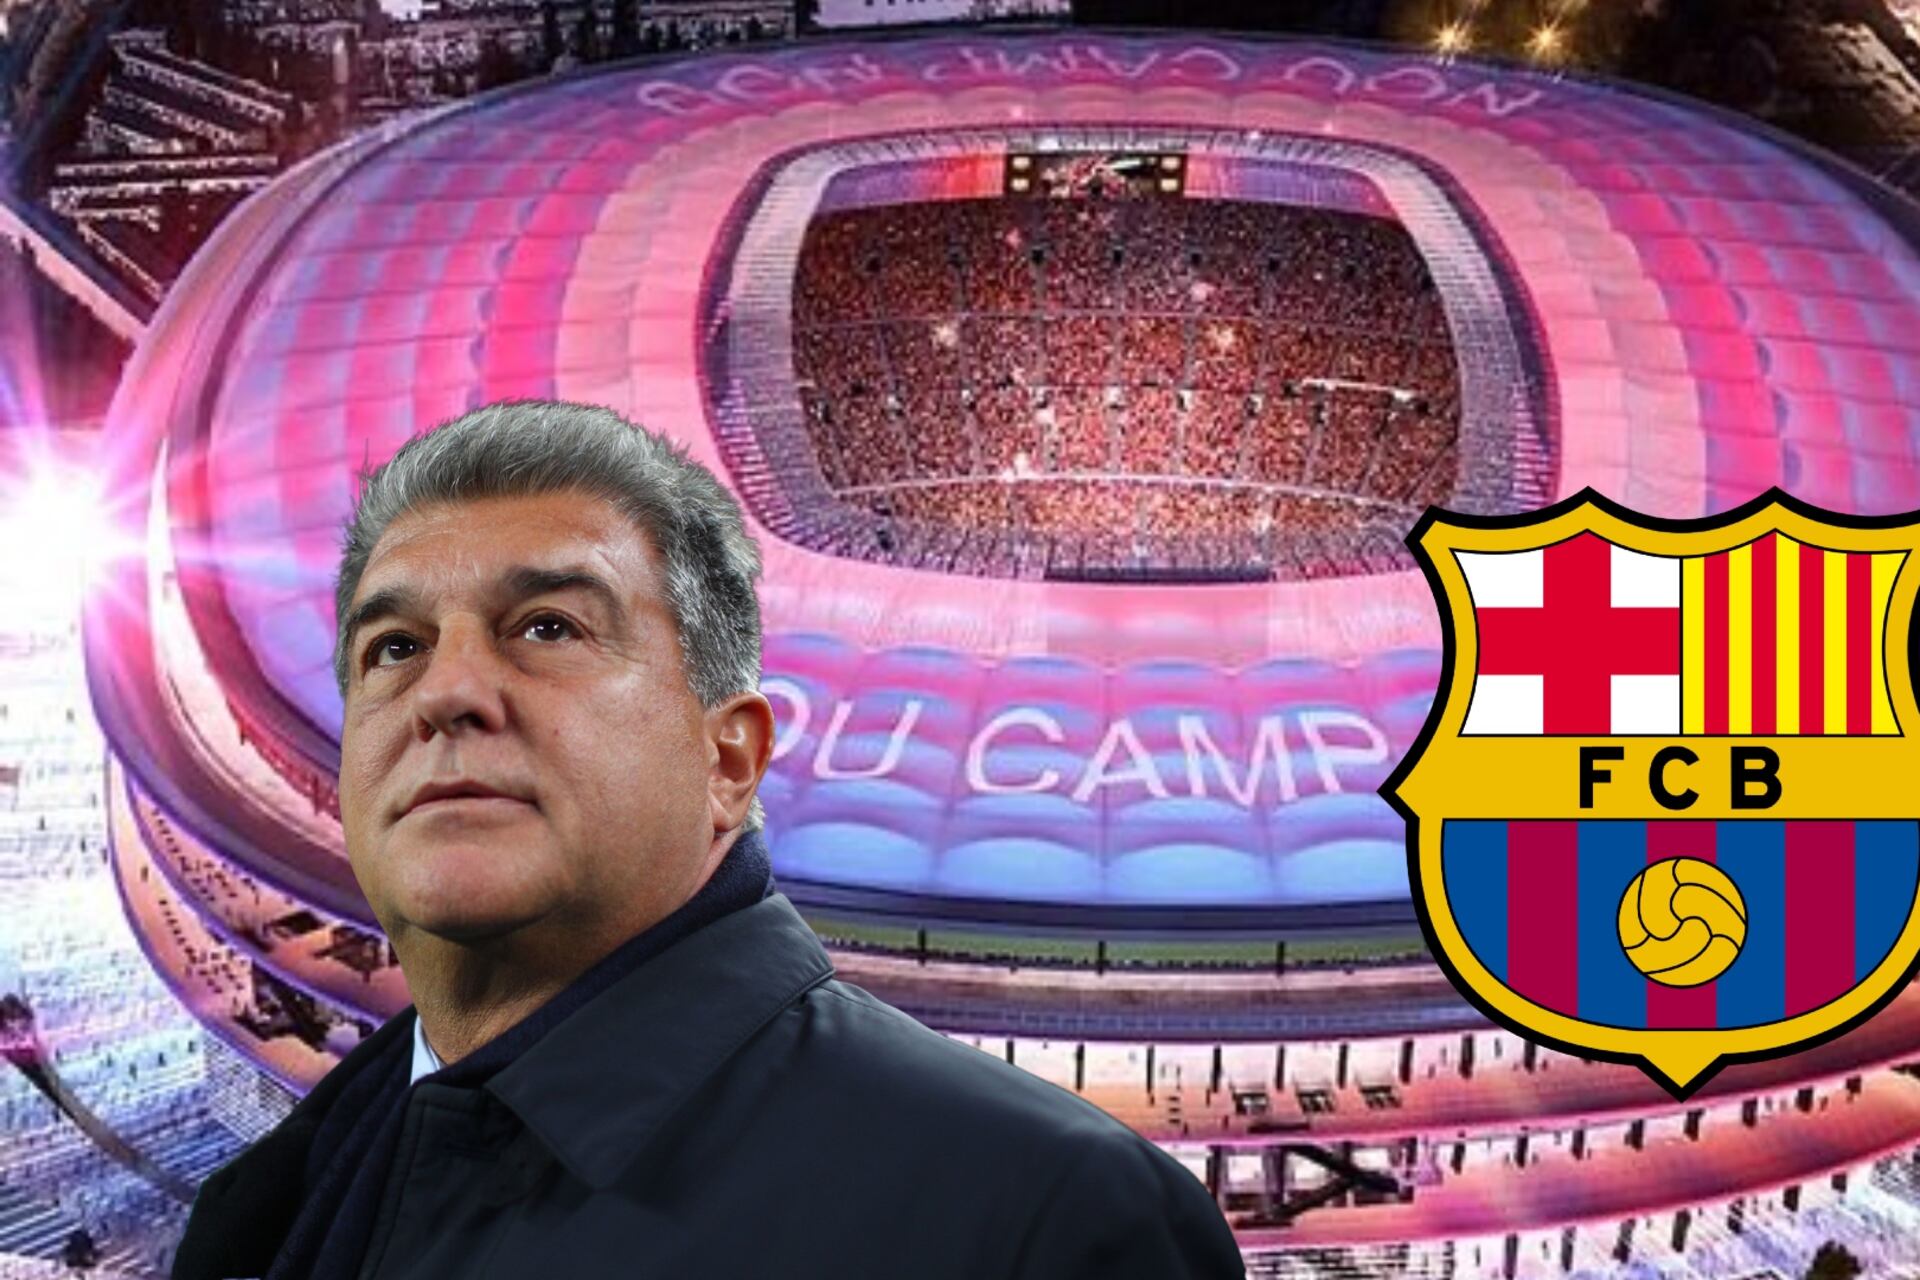 (VIDEO) It costs more than $800 million and this is how FC Barcelona's new stadium looks 